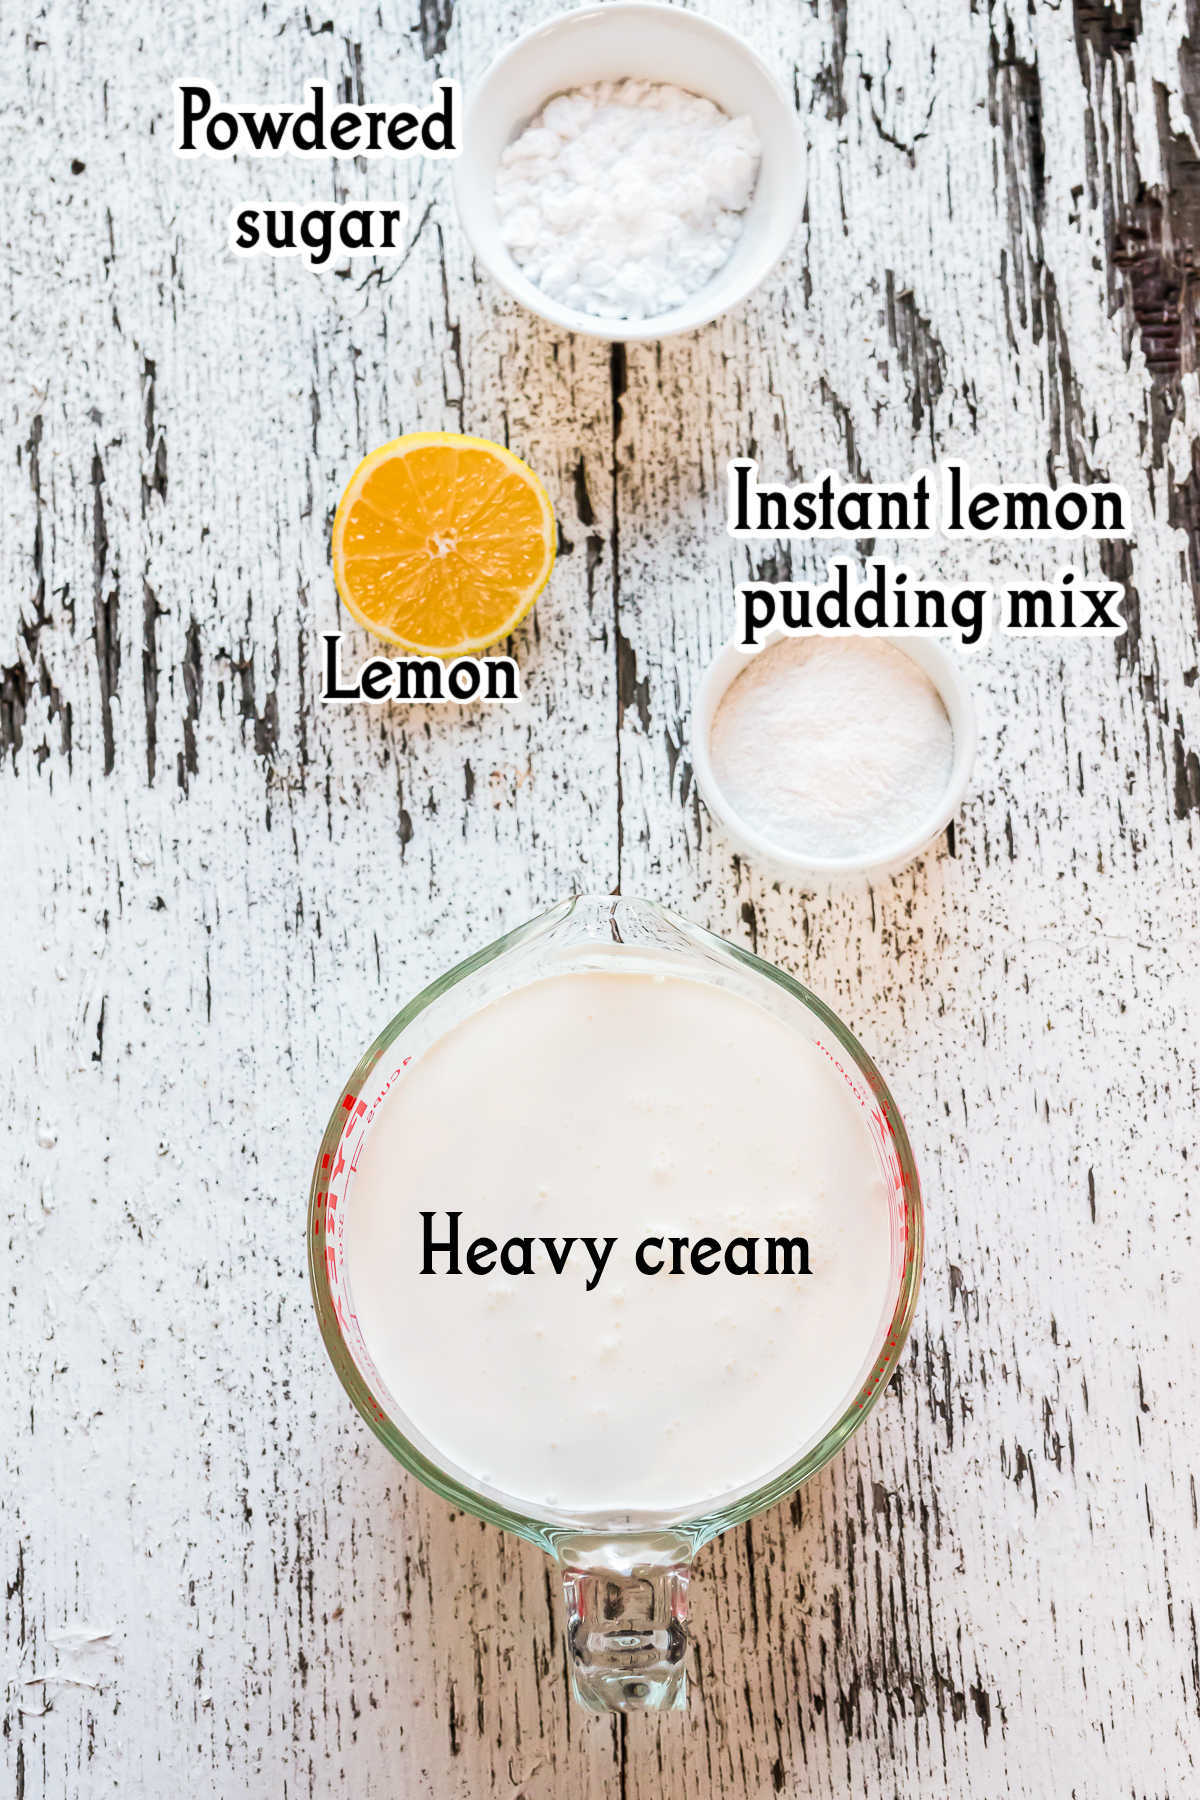 Whipped lemon frosting ingredients with labels.